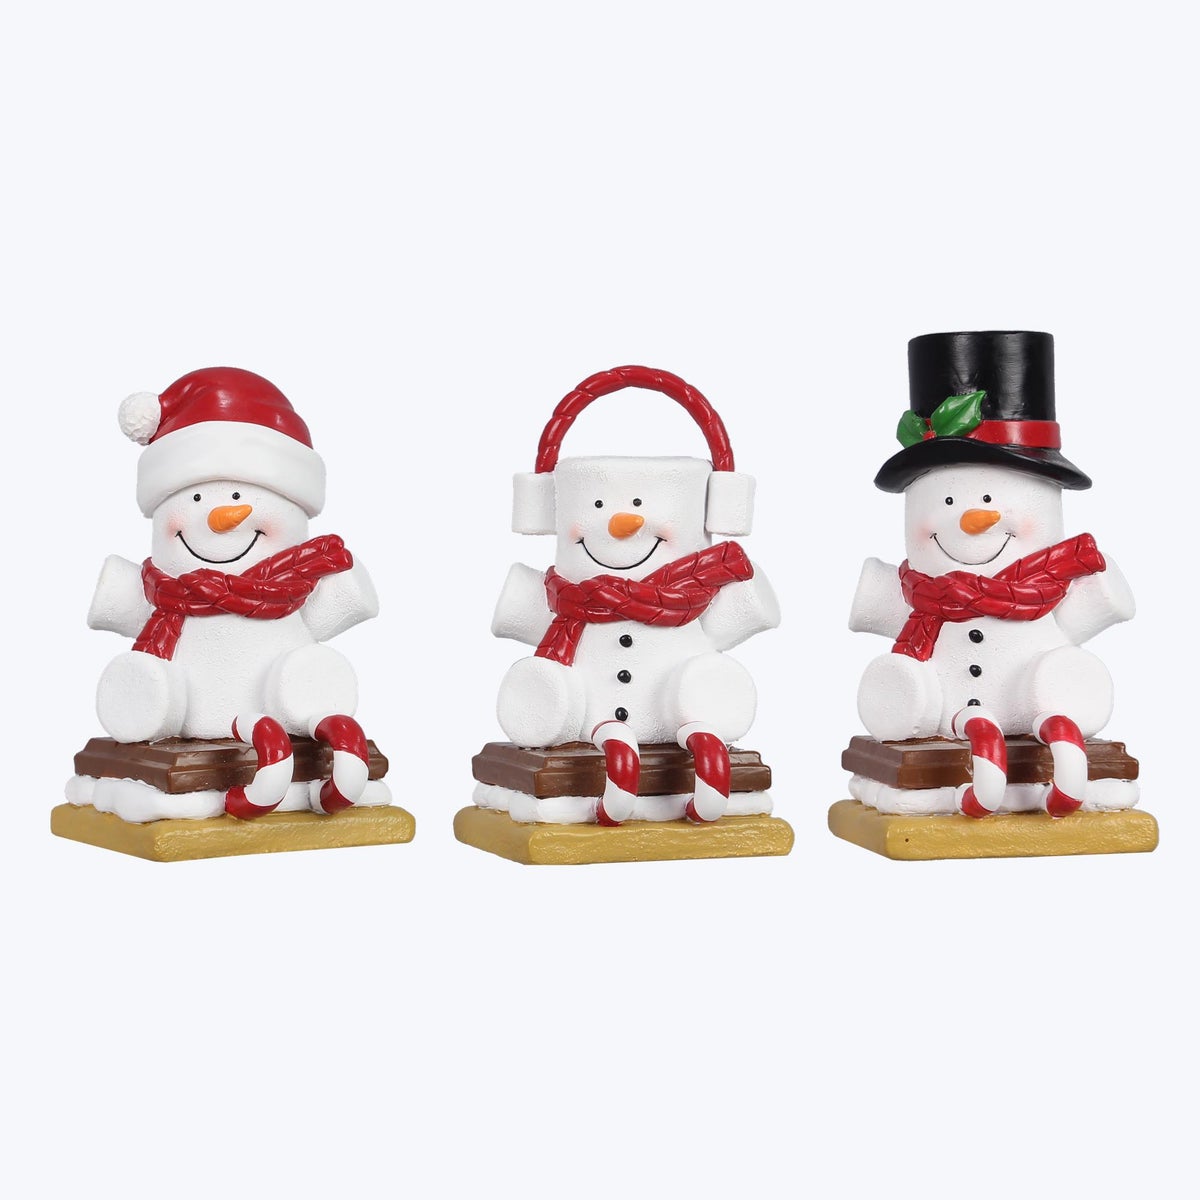 Resin Cocoa and Cookies Marshmallow Snowman on S'mores Tabletop Decor, 3 As